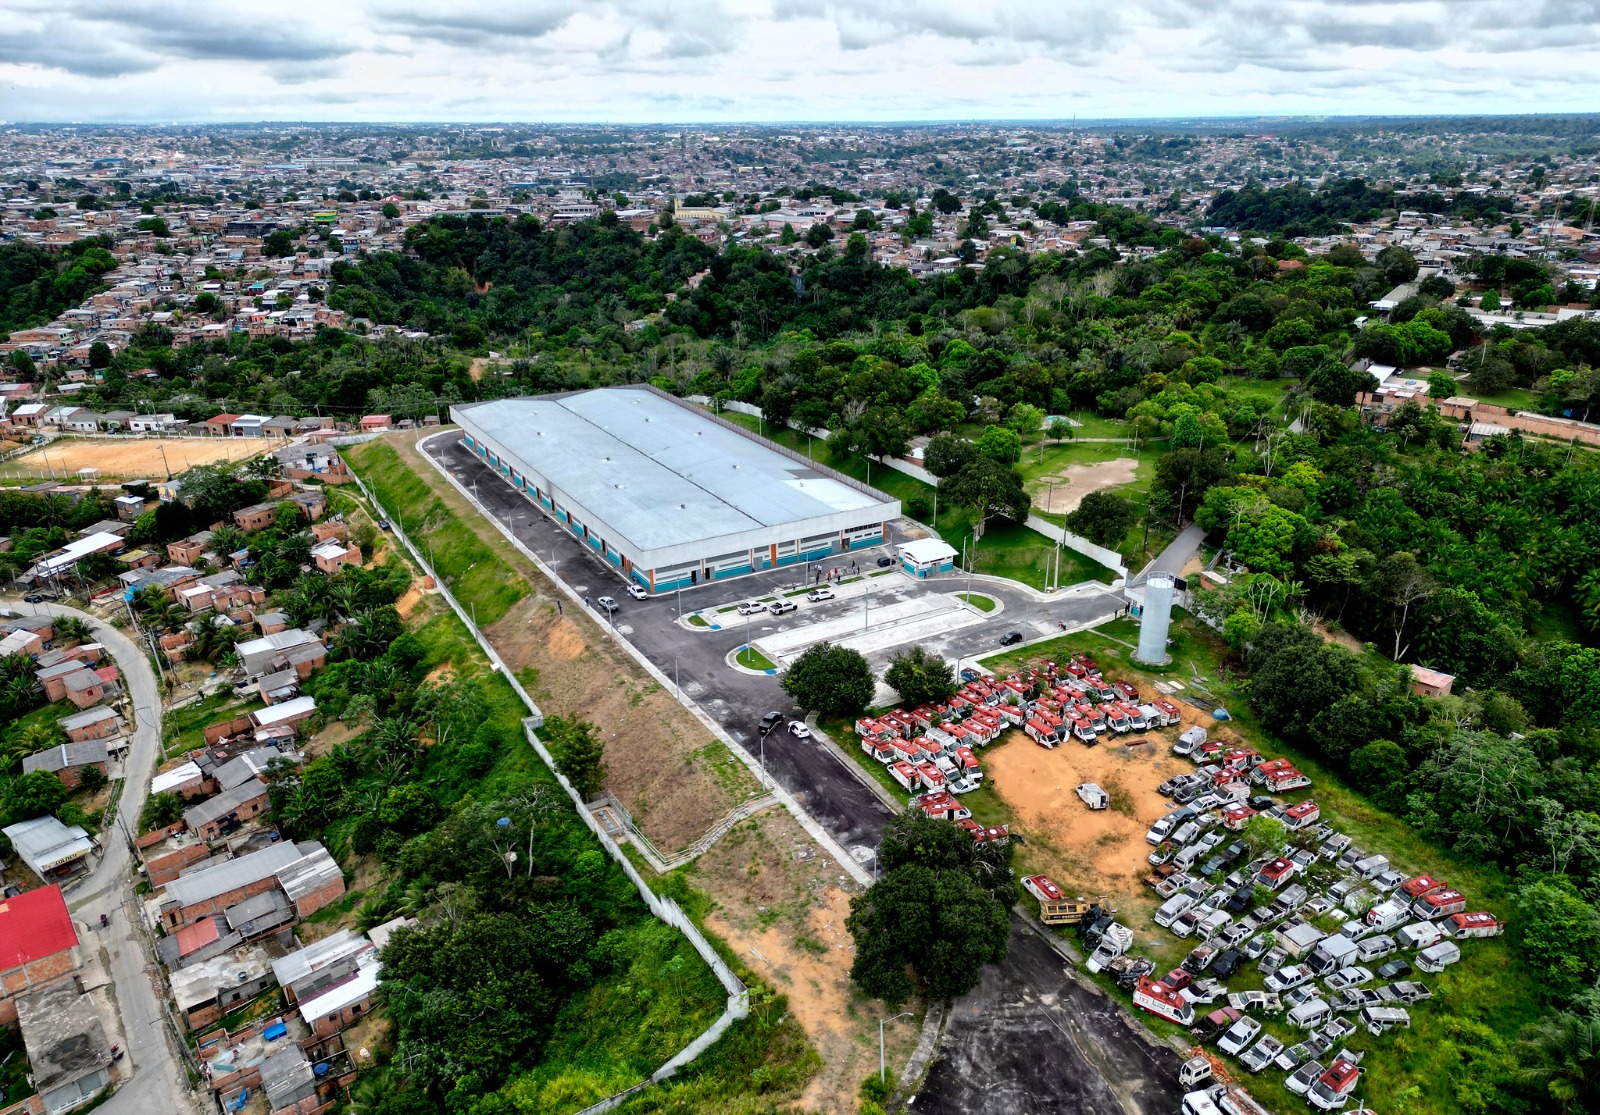 Manaus Micro and Small Business District will be delivered next week